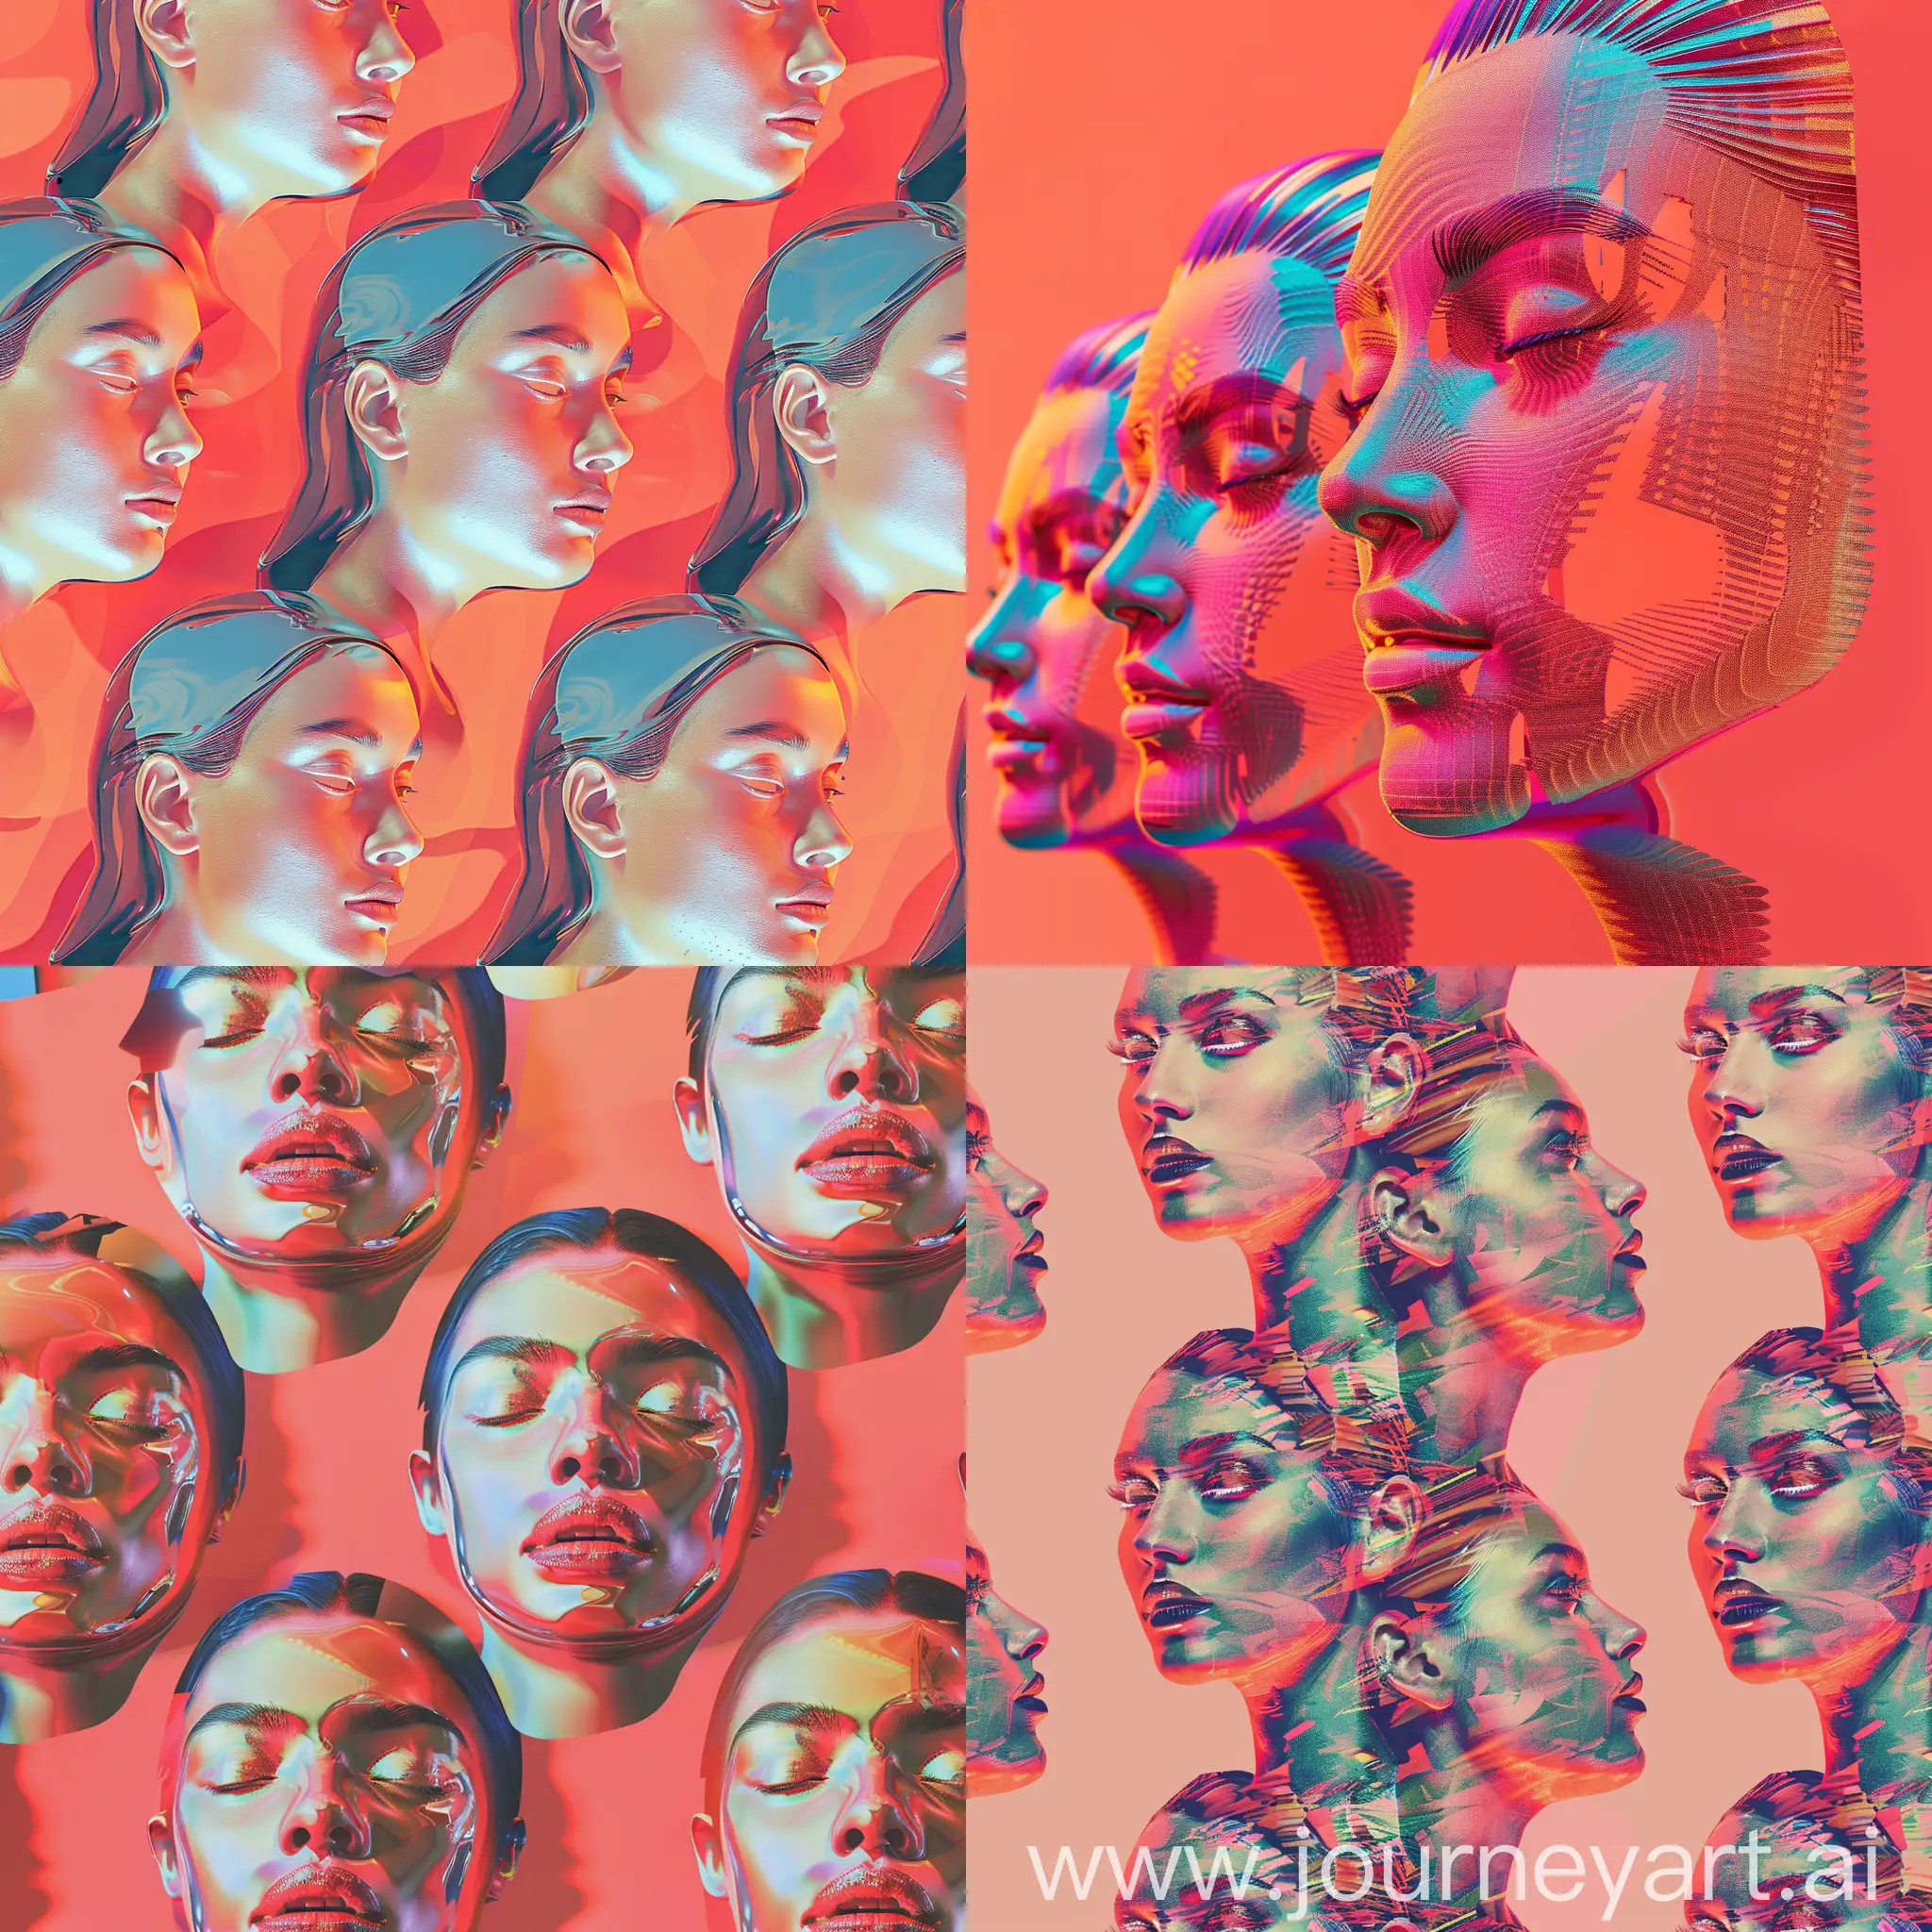 holographic female faces repeated pattern over a light-red background, hyper-realistic